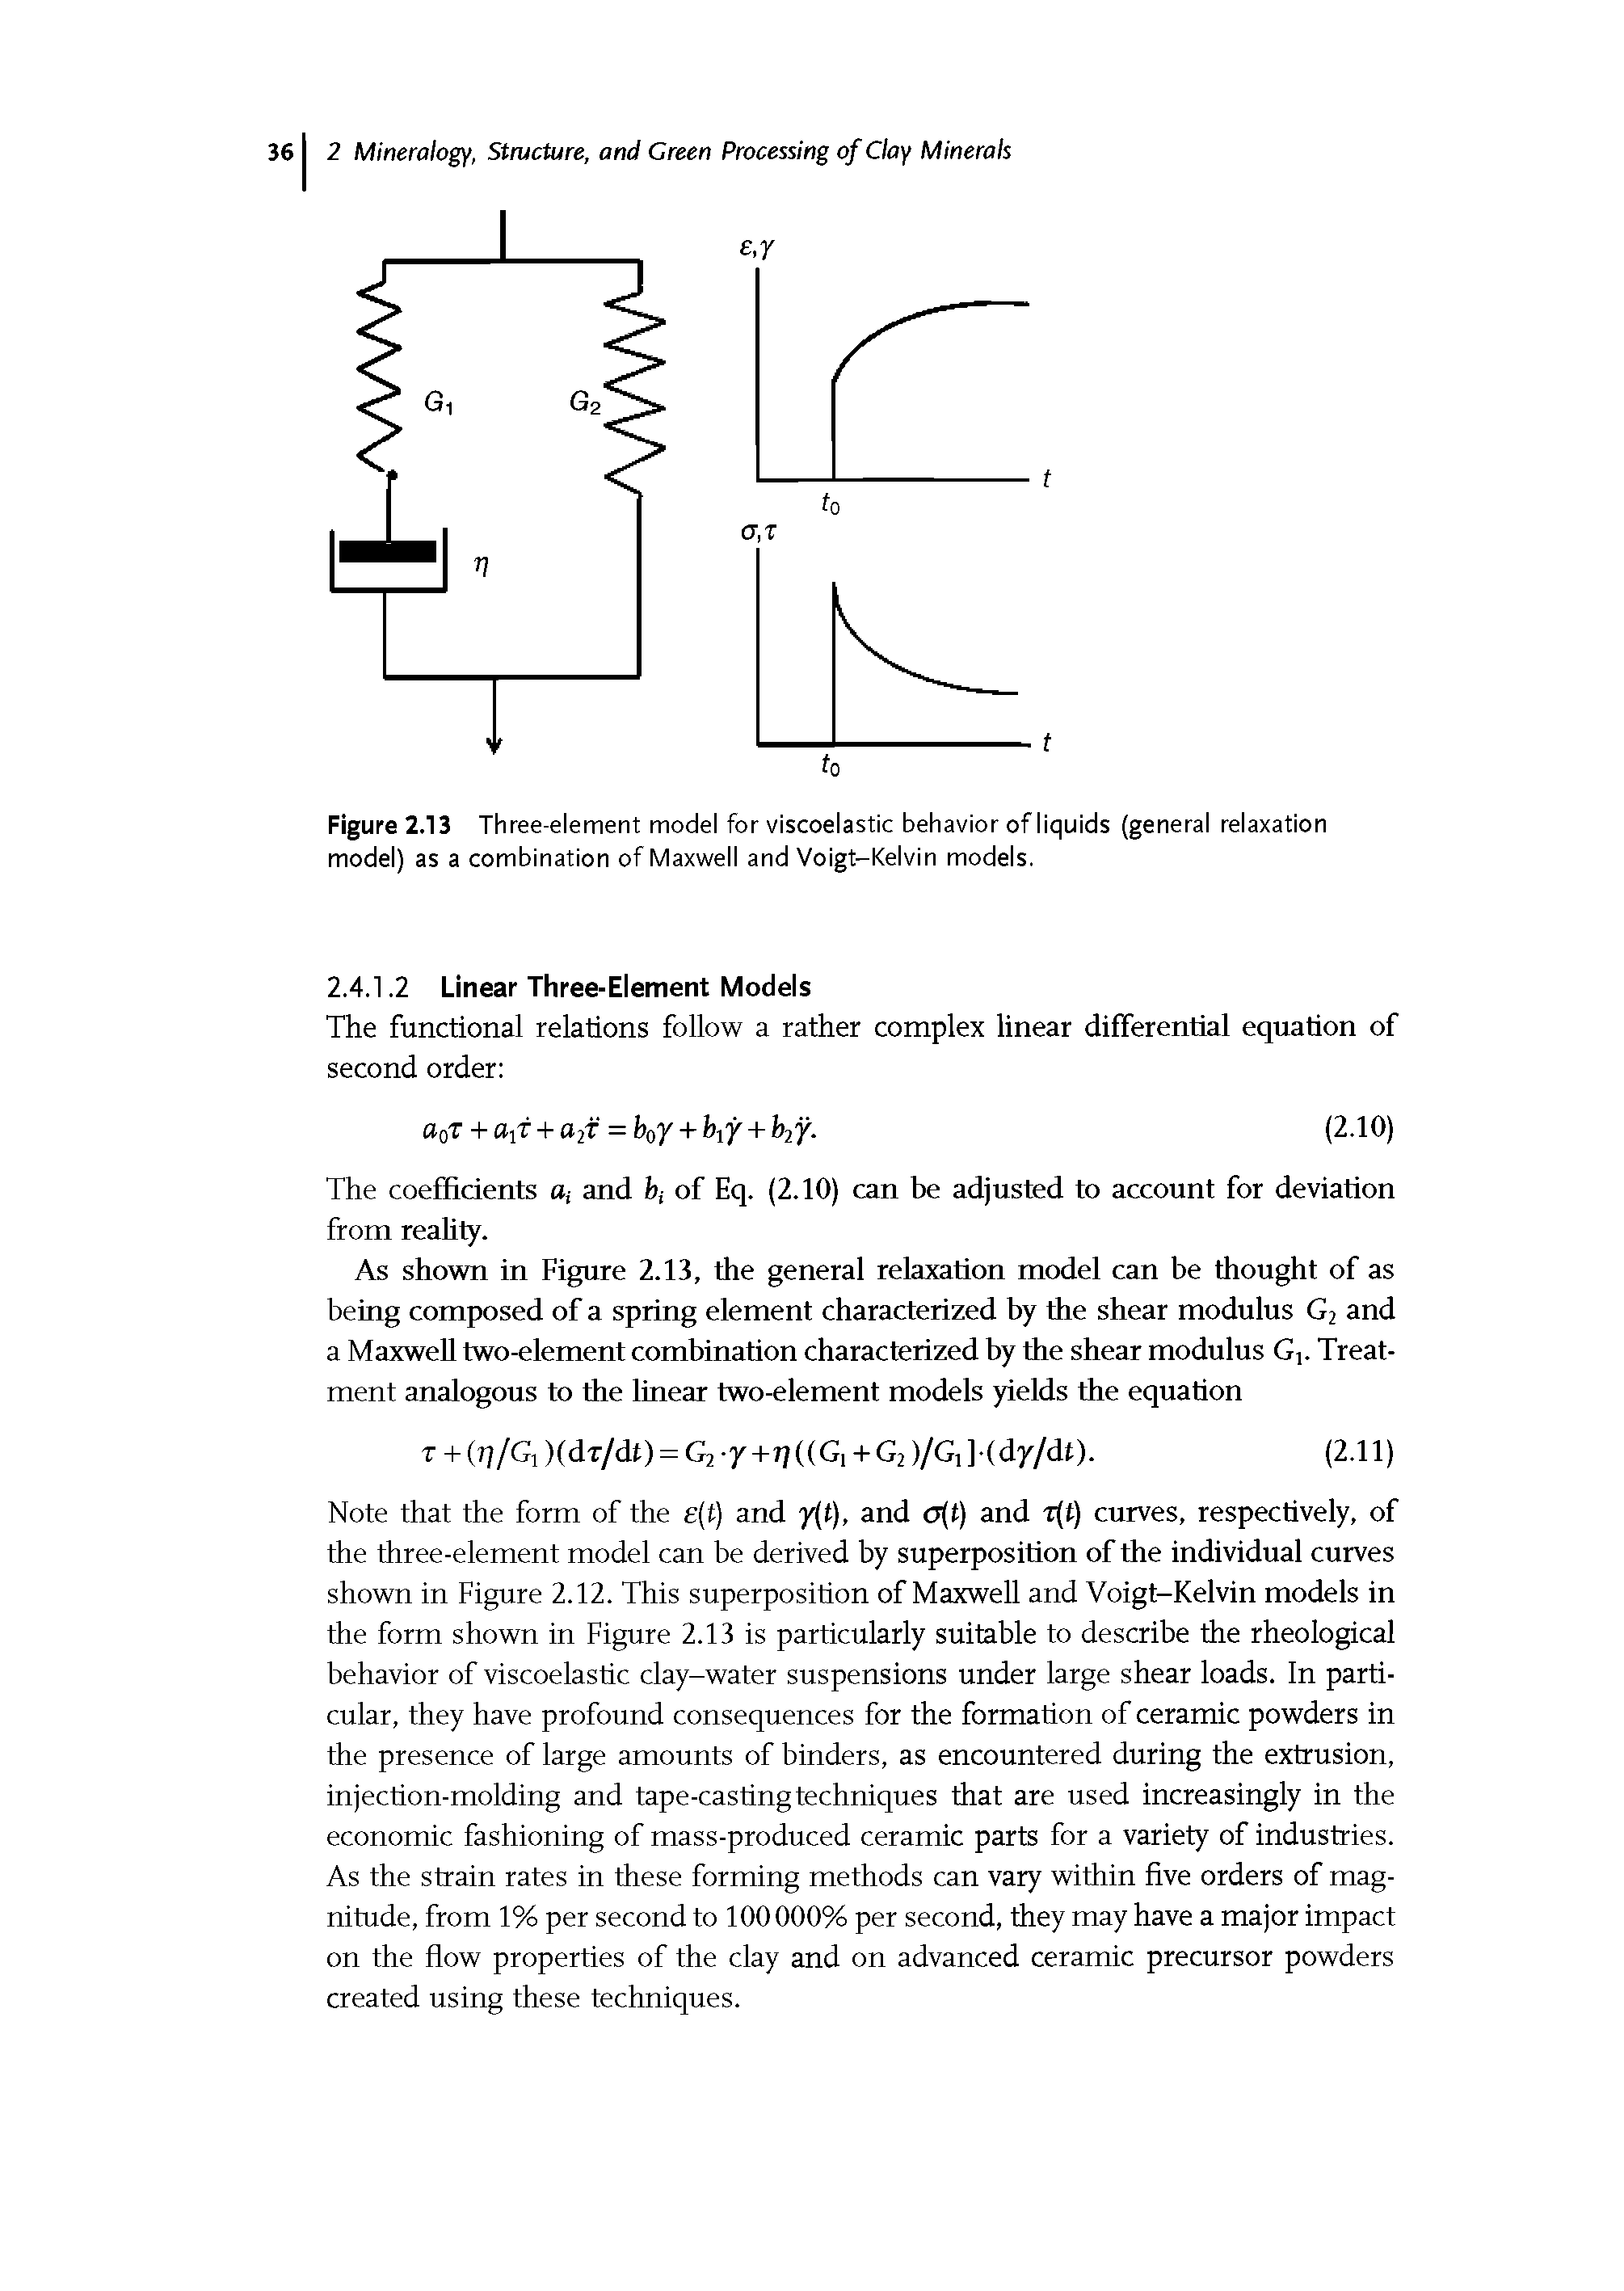 Figure 2.13 Three-element model for viscoelastic behavior of liquids (general relaxation model) as a combination of Maxwell and Voigt-Kelvin models.